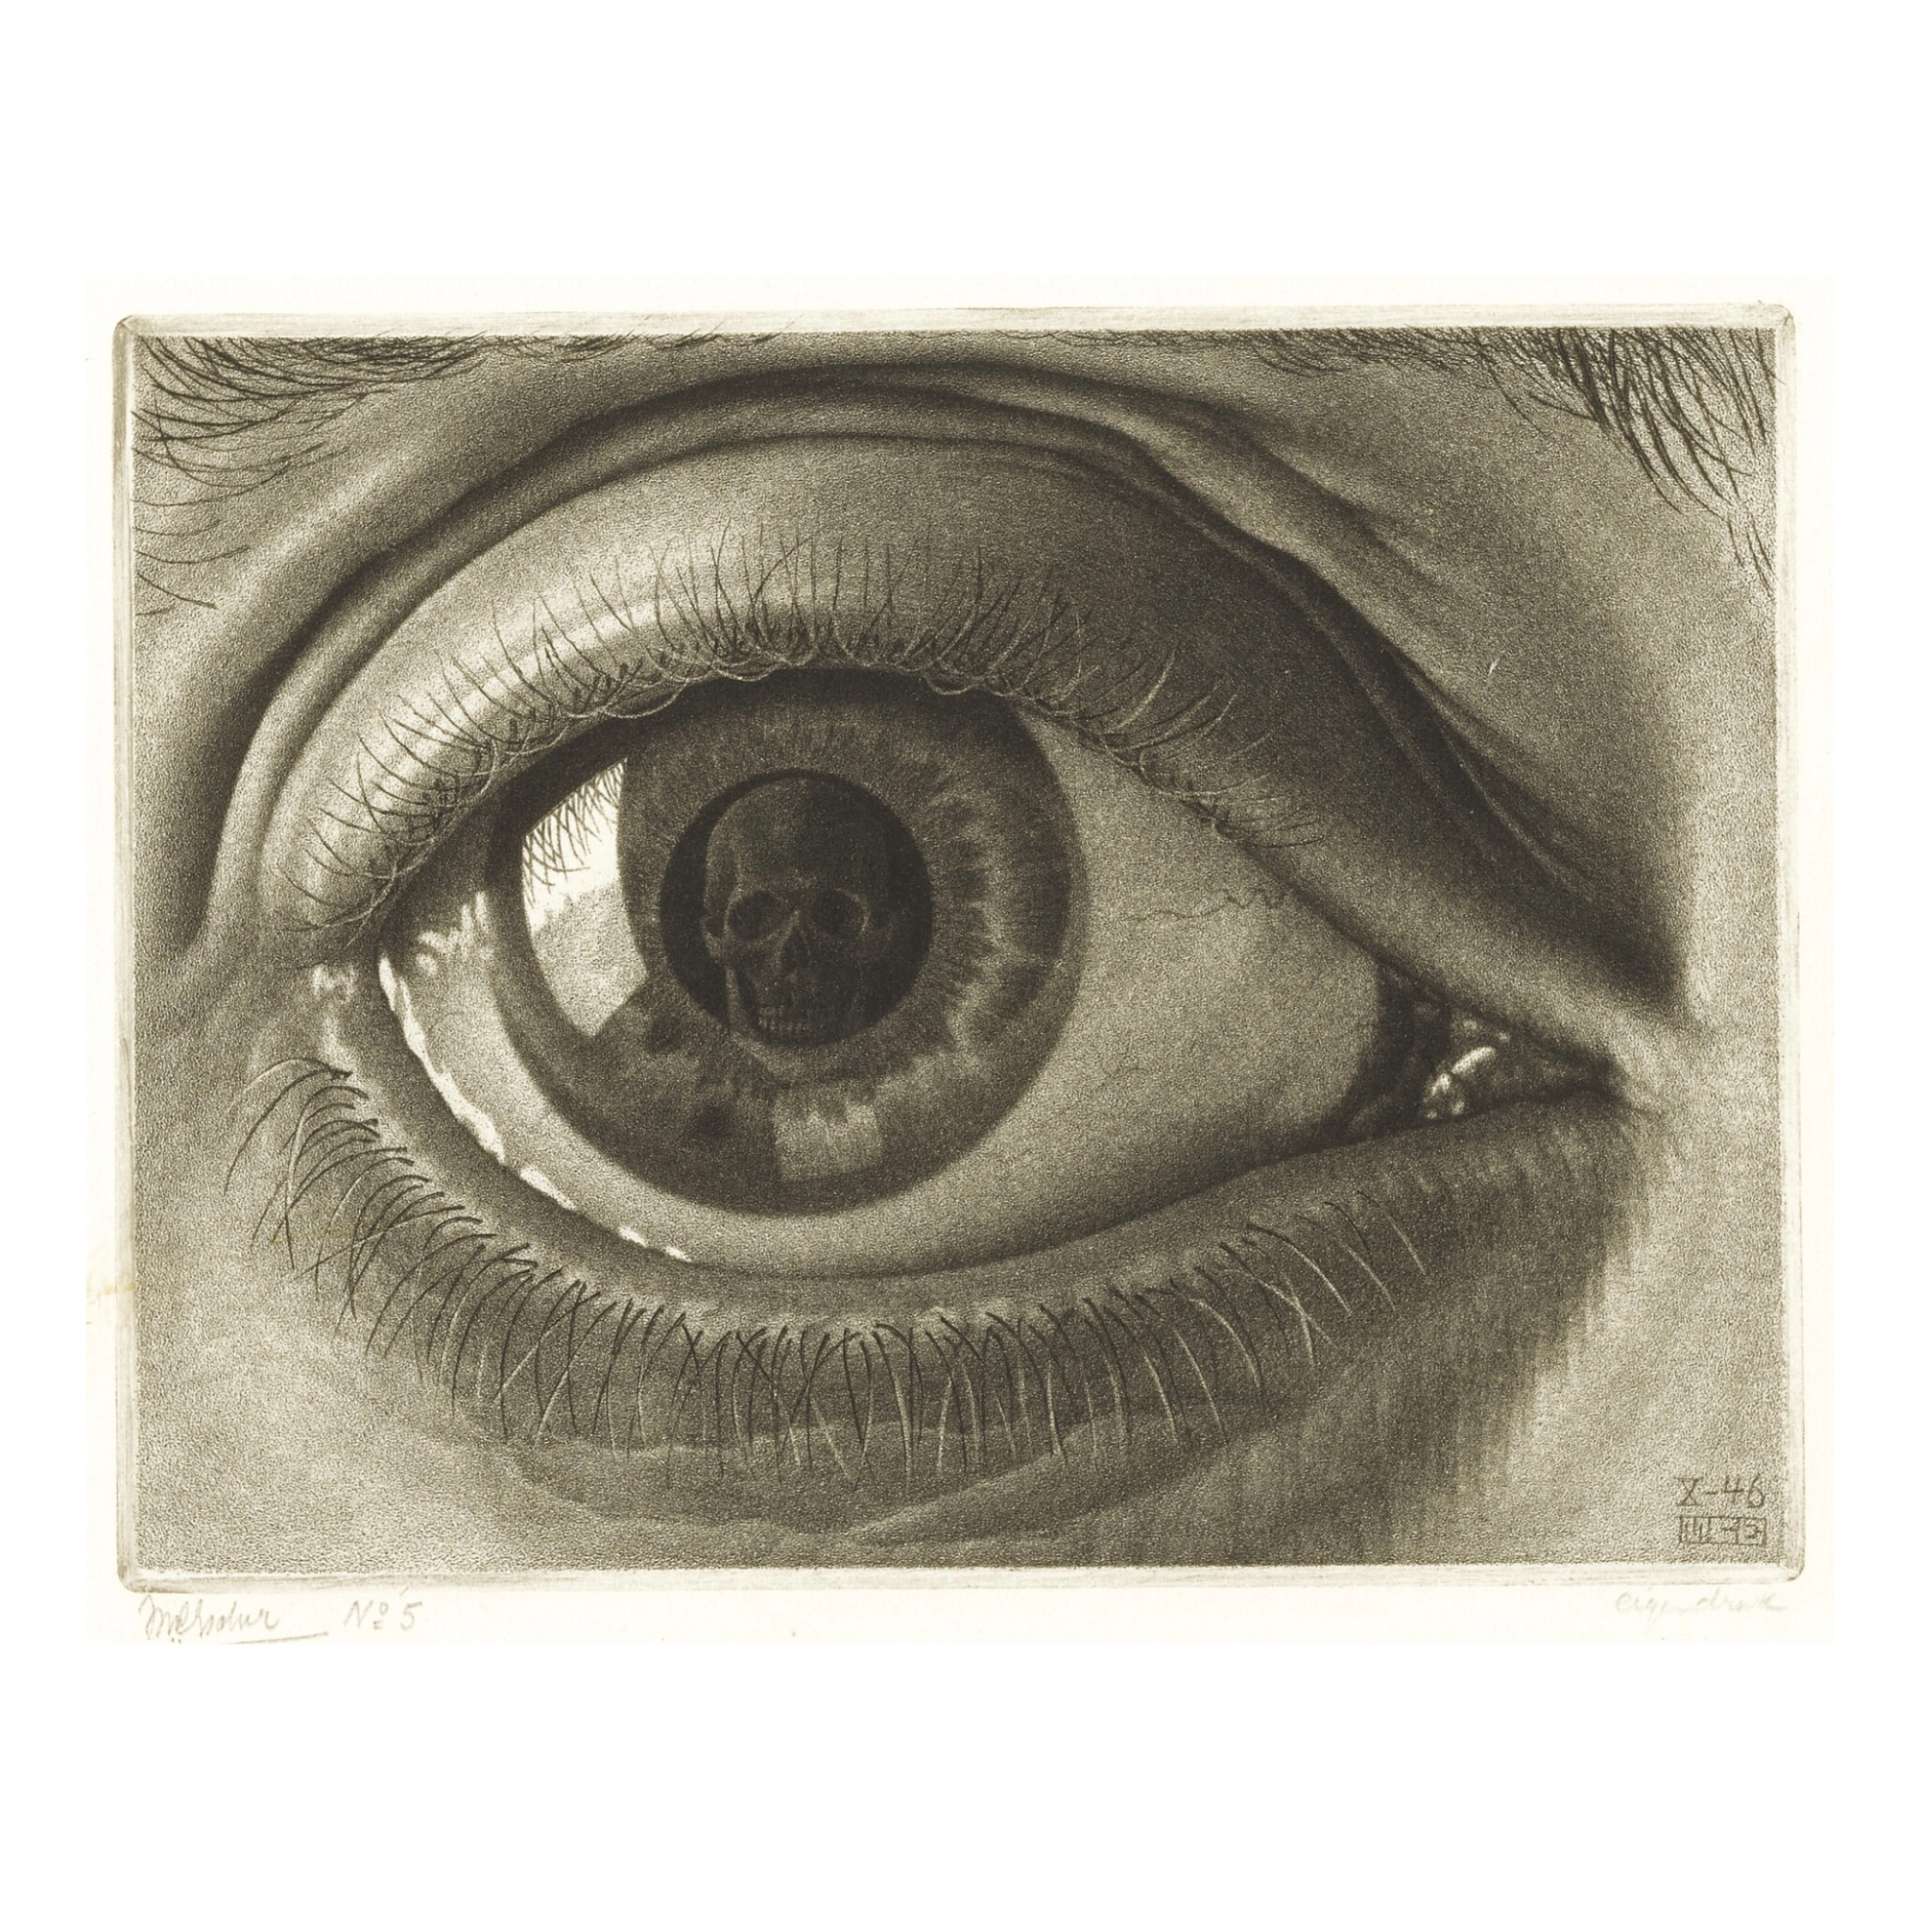 Eye by M.C. Escher. The print features a photorealistic, close-up eye. In the pupil is reflected a skull.